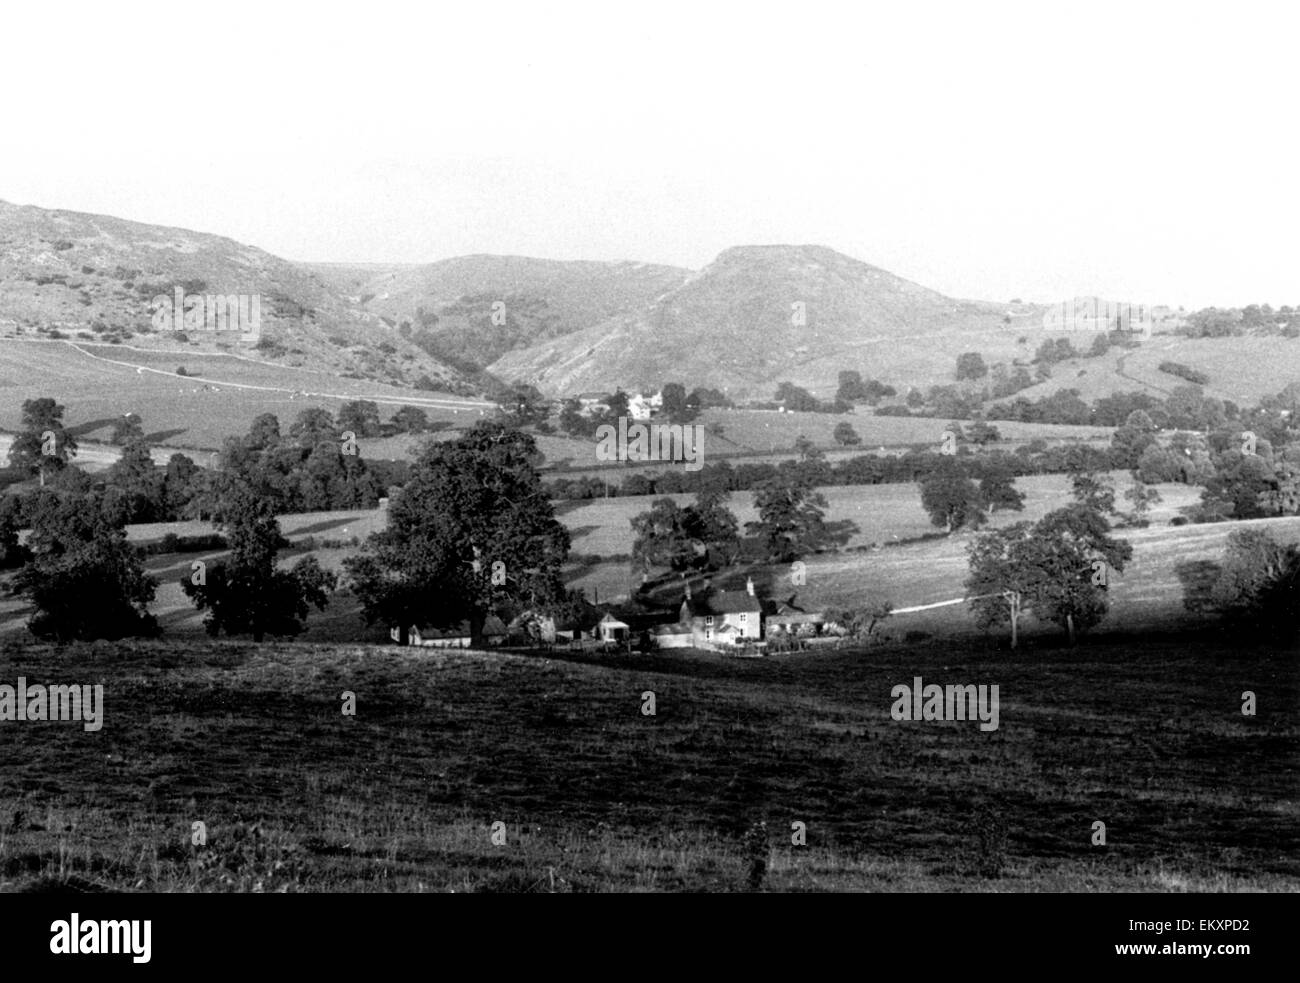 Dovedale lying betwen Bunster Hill (left) and Thorpe Cloud (right) in Derbyshire. 1970 Stock Photo